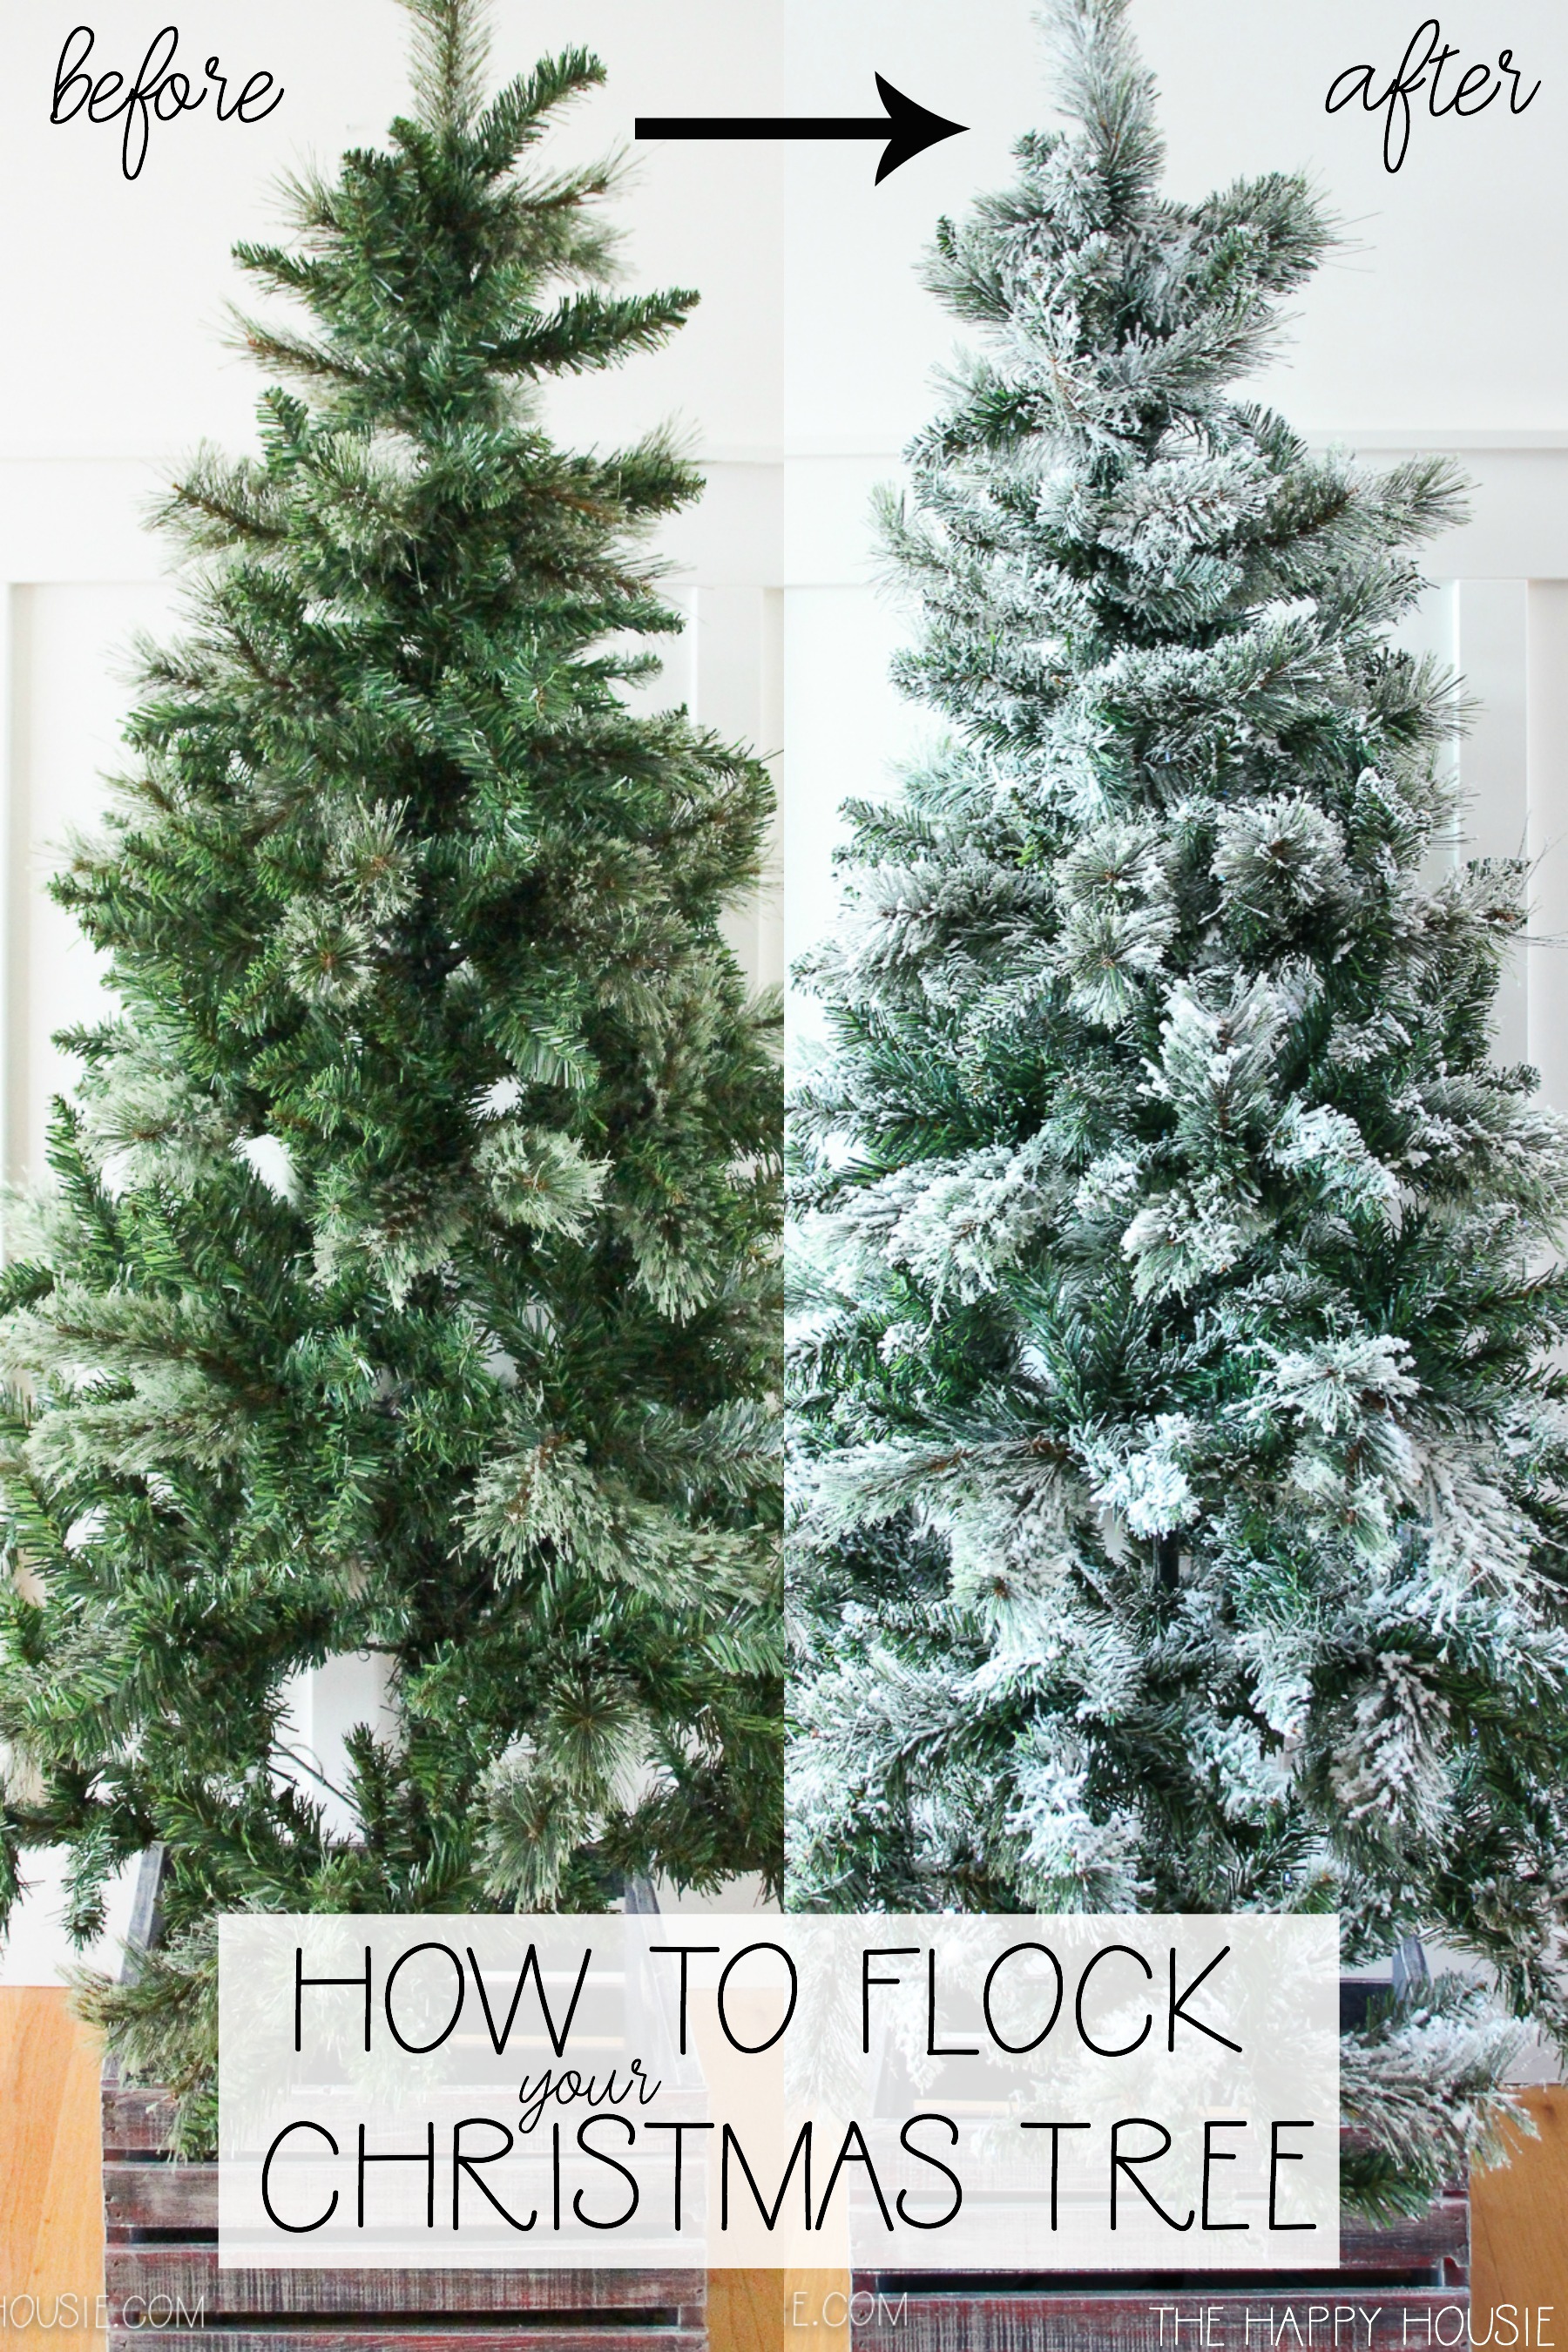 How to flock your own Christmas Tree - The Cofran Home